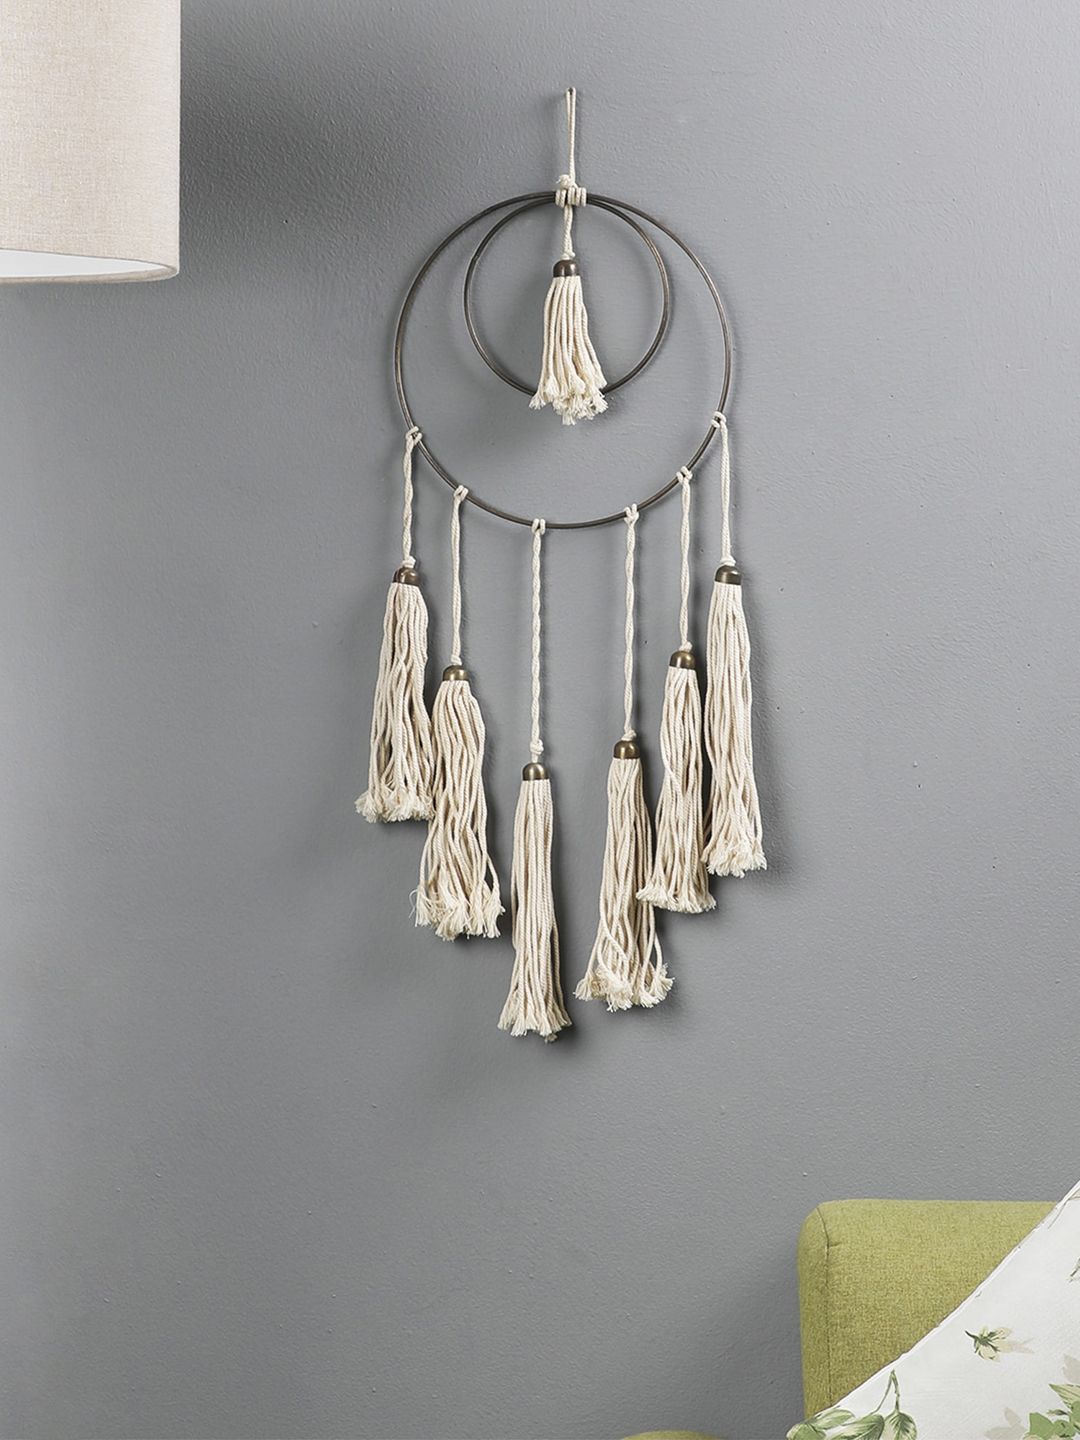 The Decor Mart Off White & Copper-Toned Handcrafted Moon Style Macrame Dream Catcher Price in India